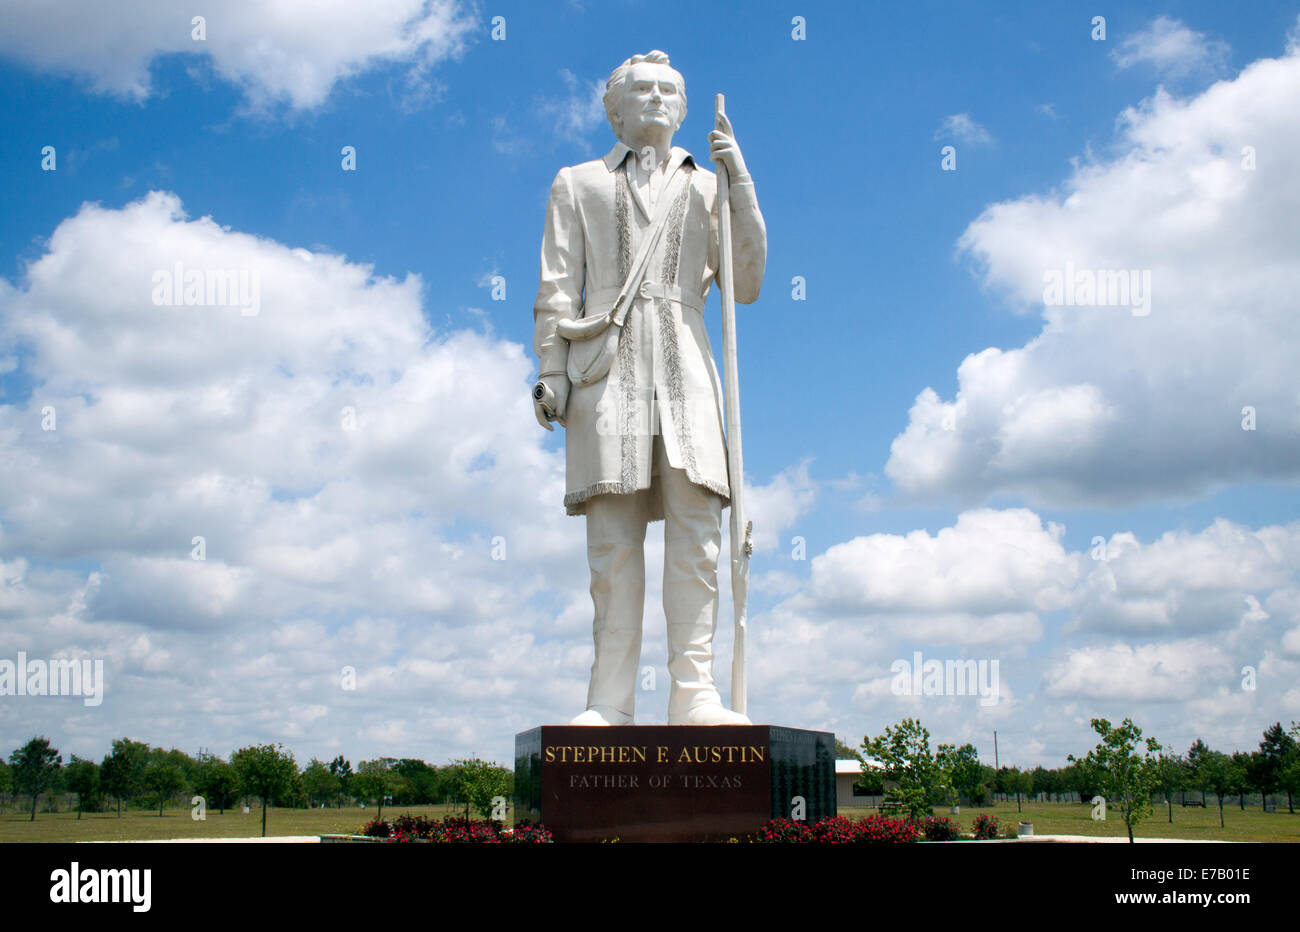 Stephen Austin statue in Angleton Texas Banque D'Images